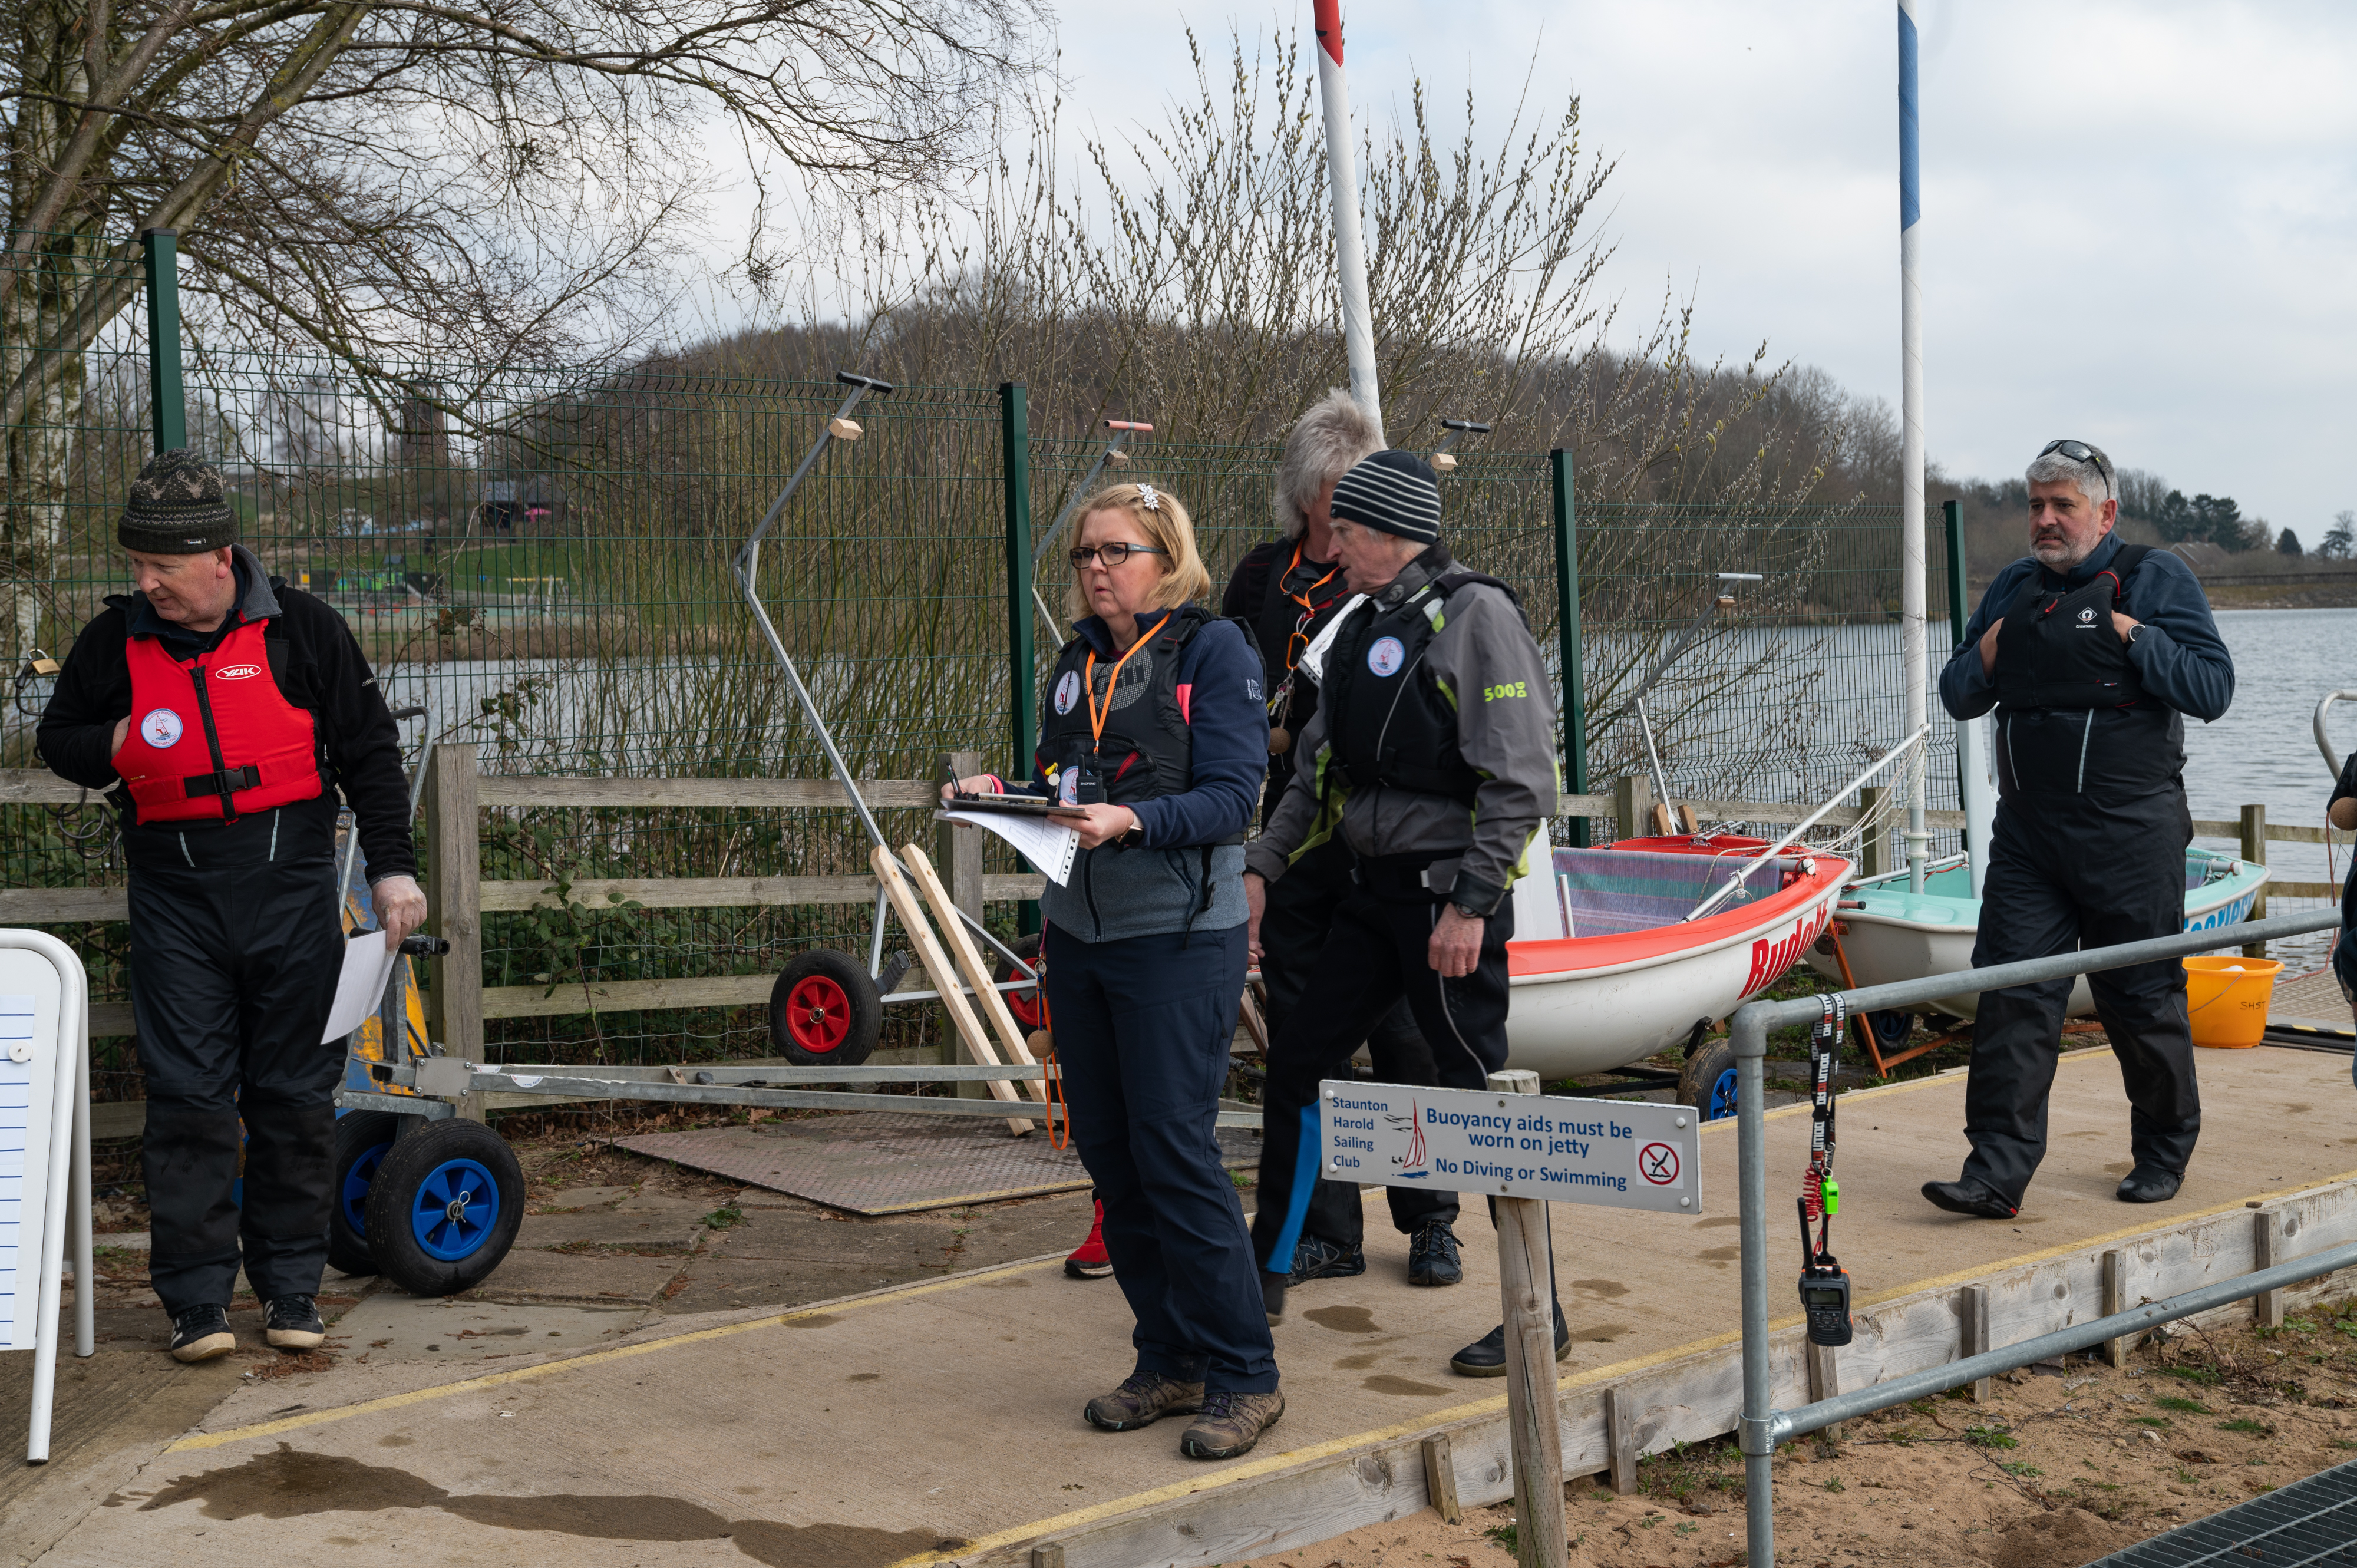 Sailability Session - Sunday 20th March 2022